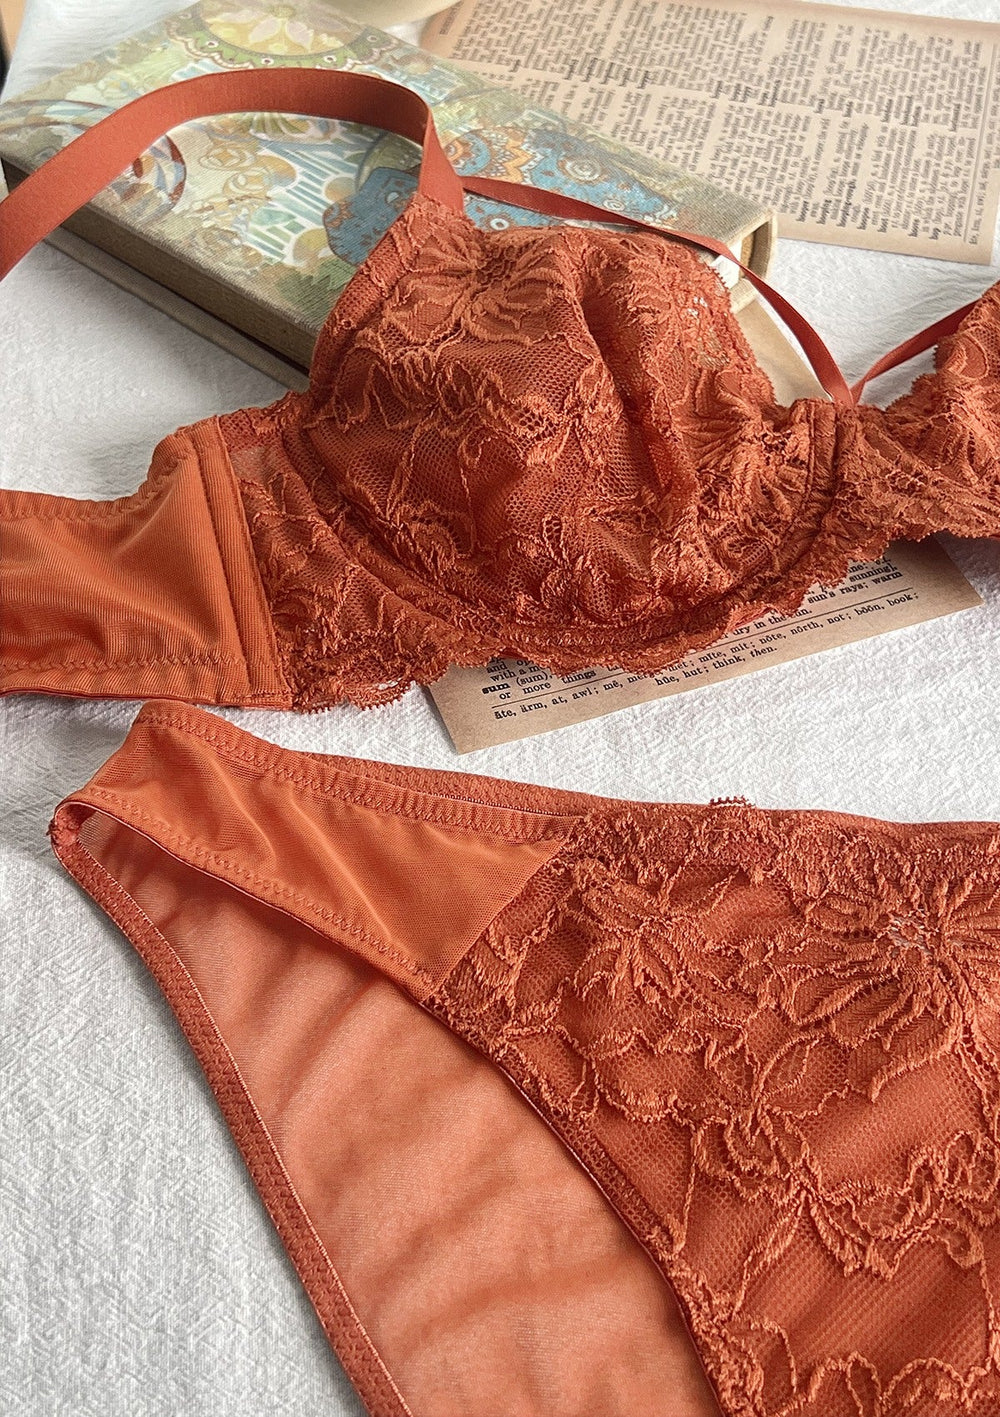 HSIA Pretty In Petals Unlined Lace Bra: Comfortable and Supportive